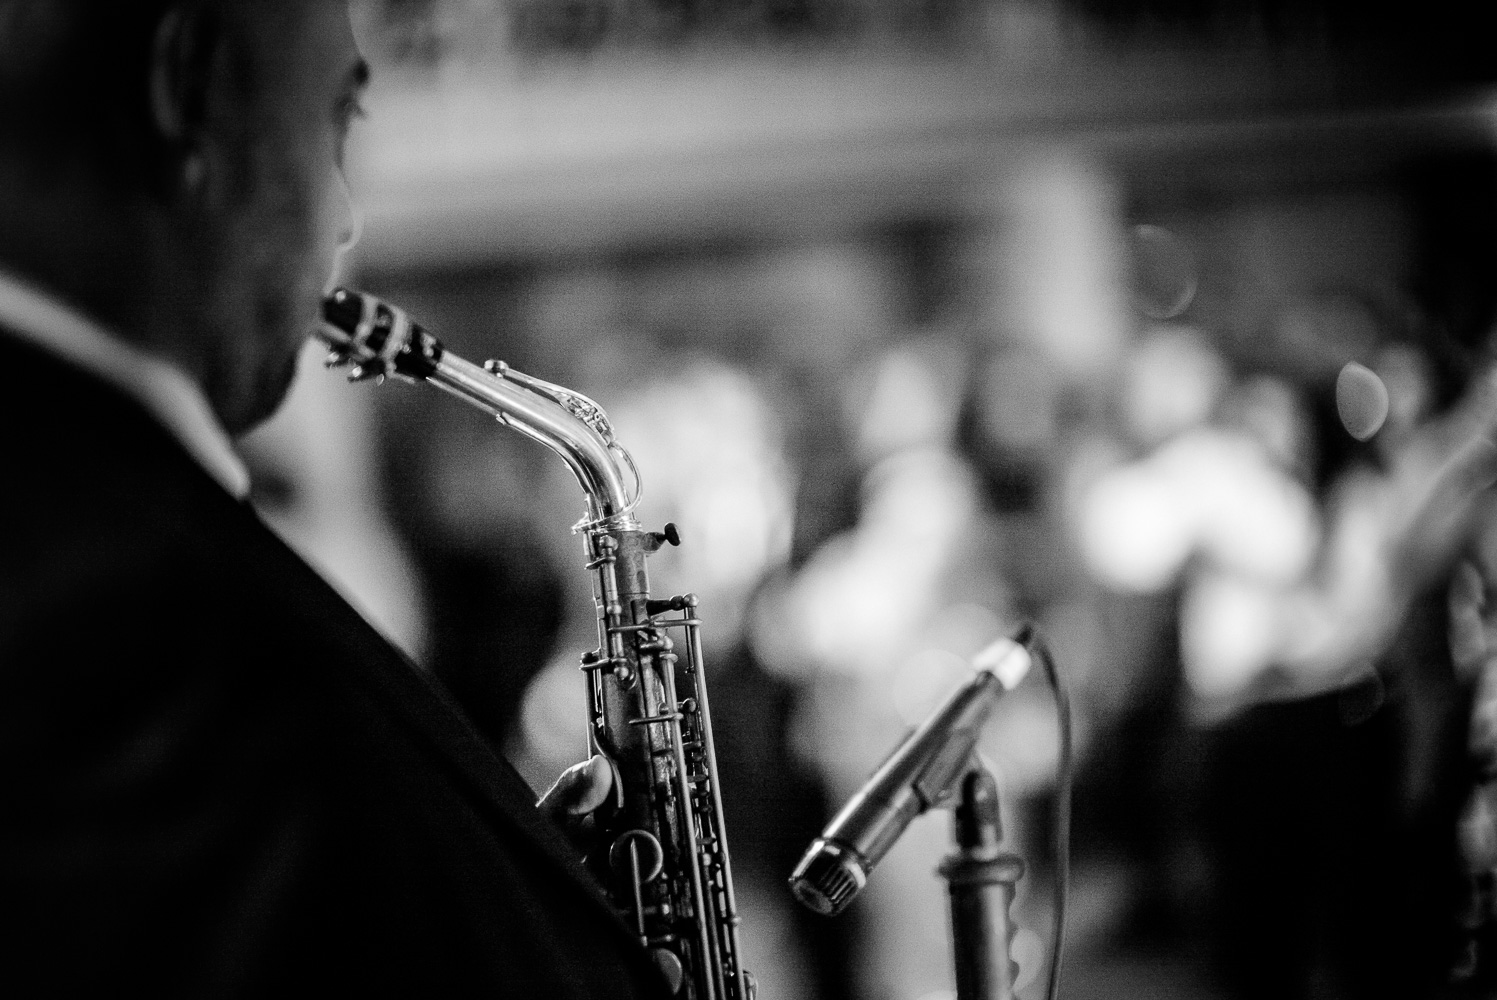 Saxophonist from the band Finding Friday performing at St. Anthony Hotel San Antonio Wedding Reception-56